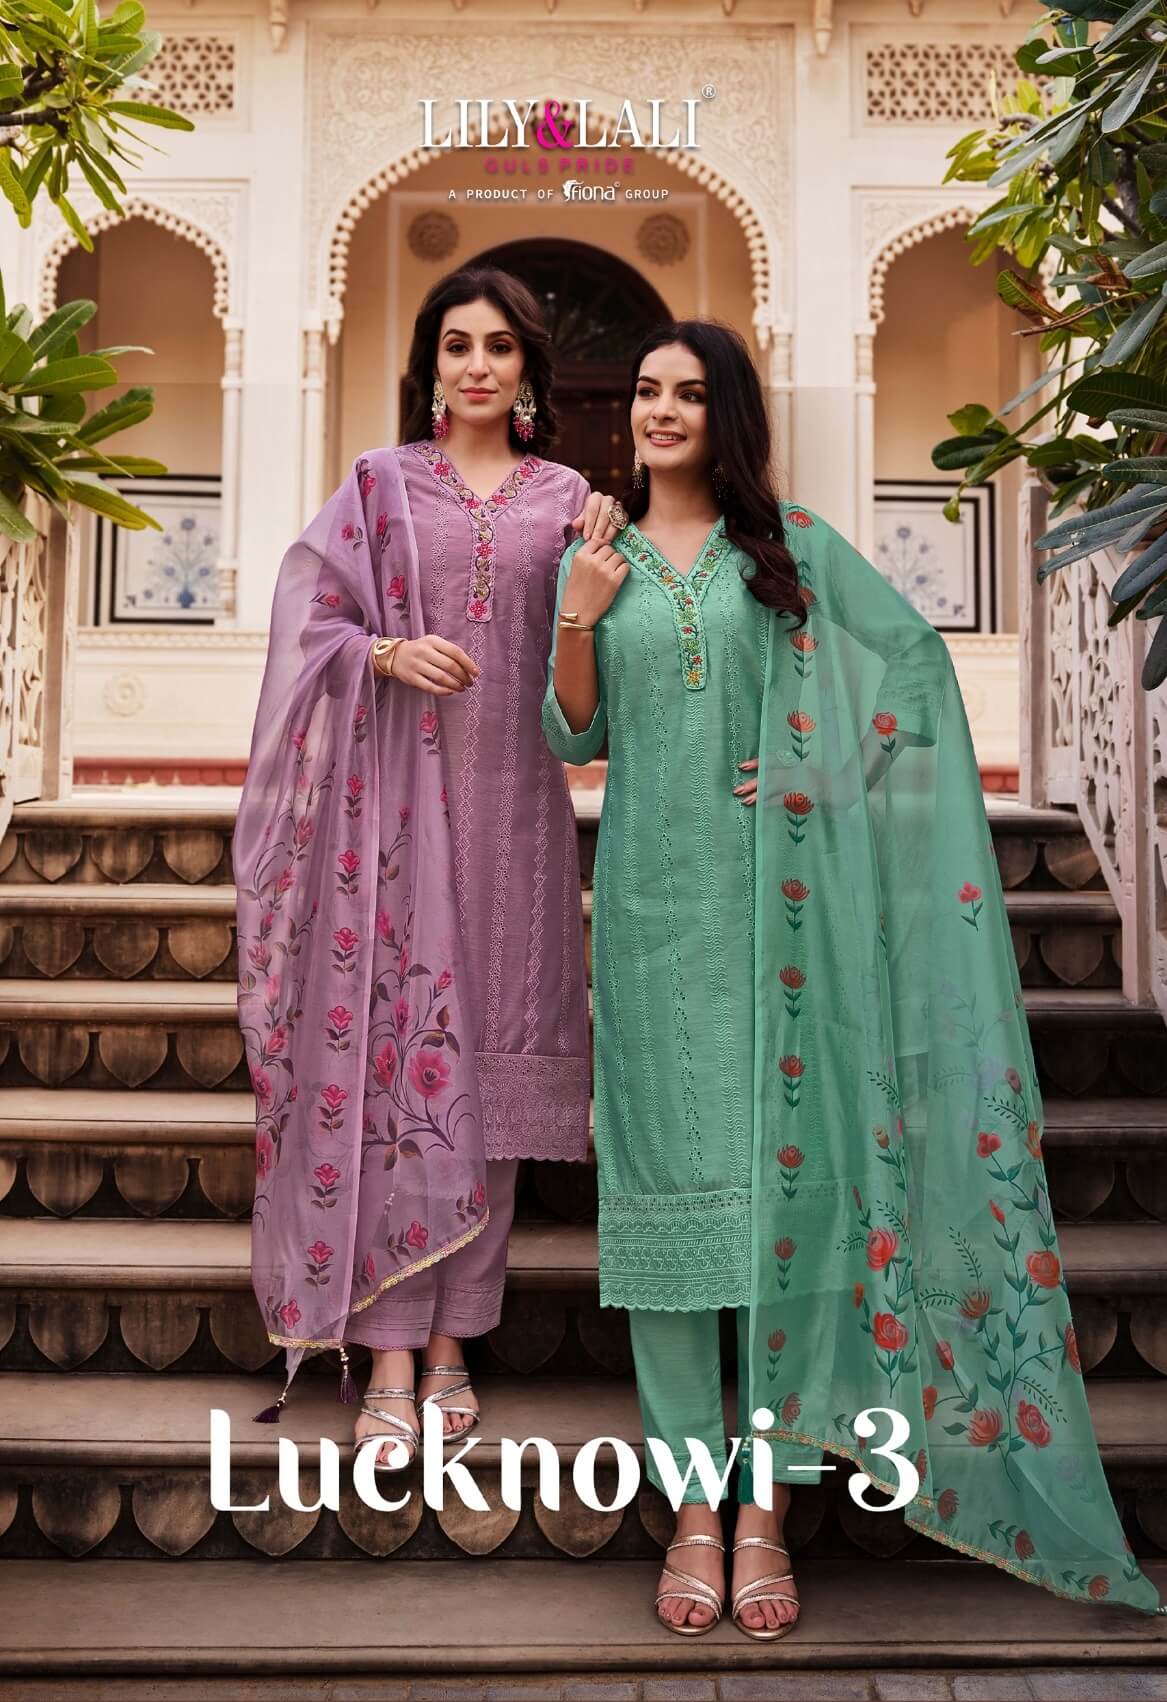 Lily And Lali Lucknowi Vol 3 Churidar Salwar Suits Catalog collection 6